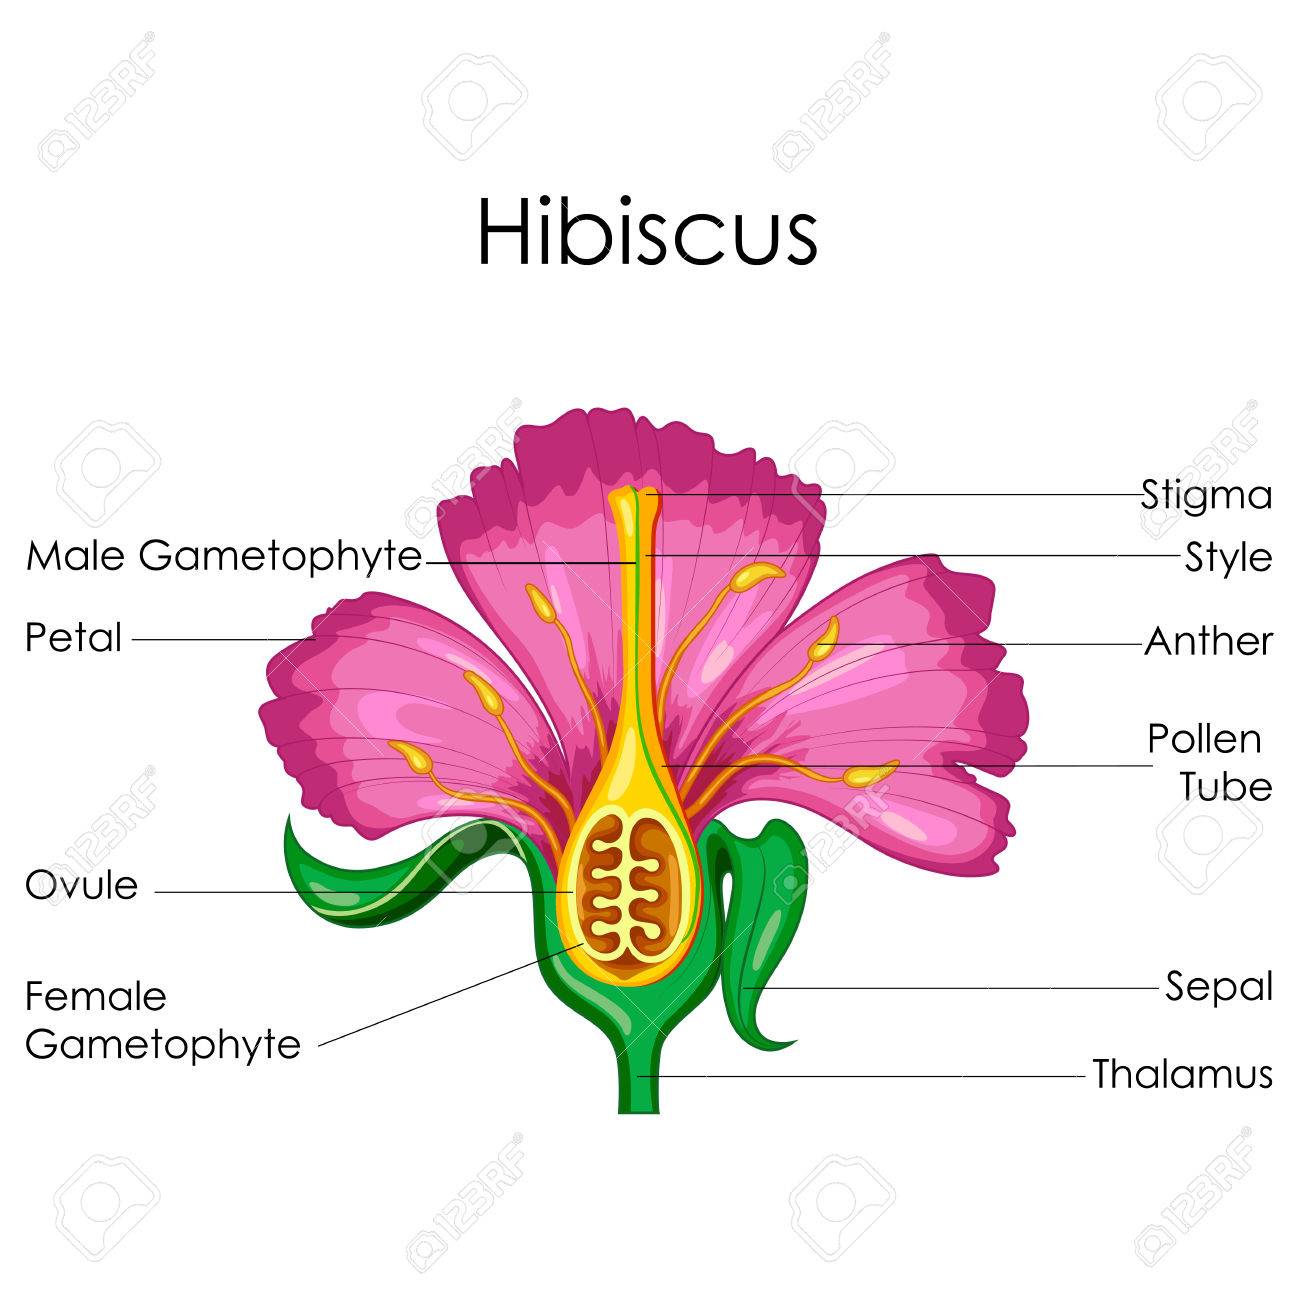 Education Chart Of Biology For Anatomy Of Hibiscus Flower Diagram Royalty  Free Cliparts, Vectors, And Stock Illustration. Image 80712757.